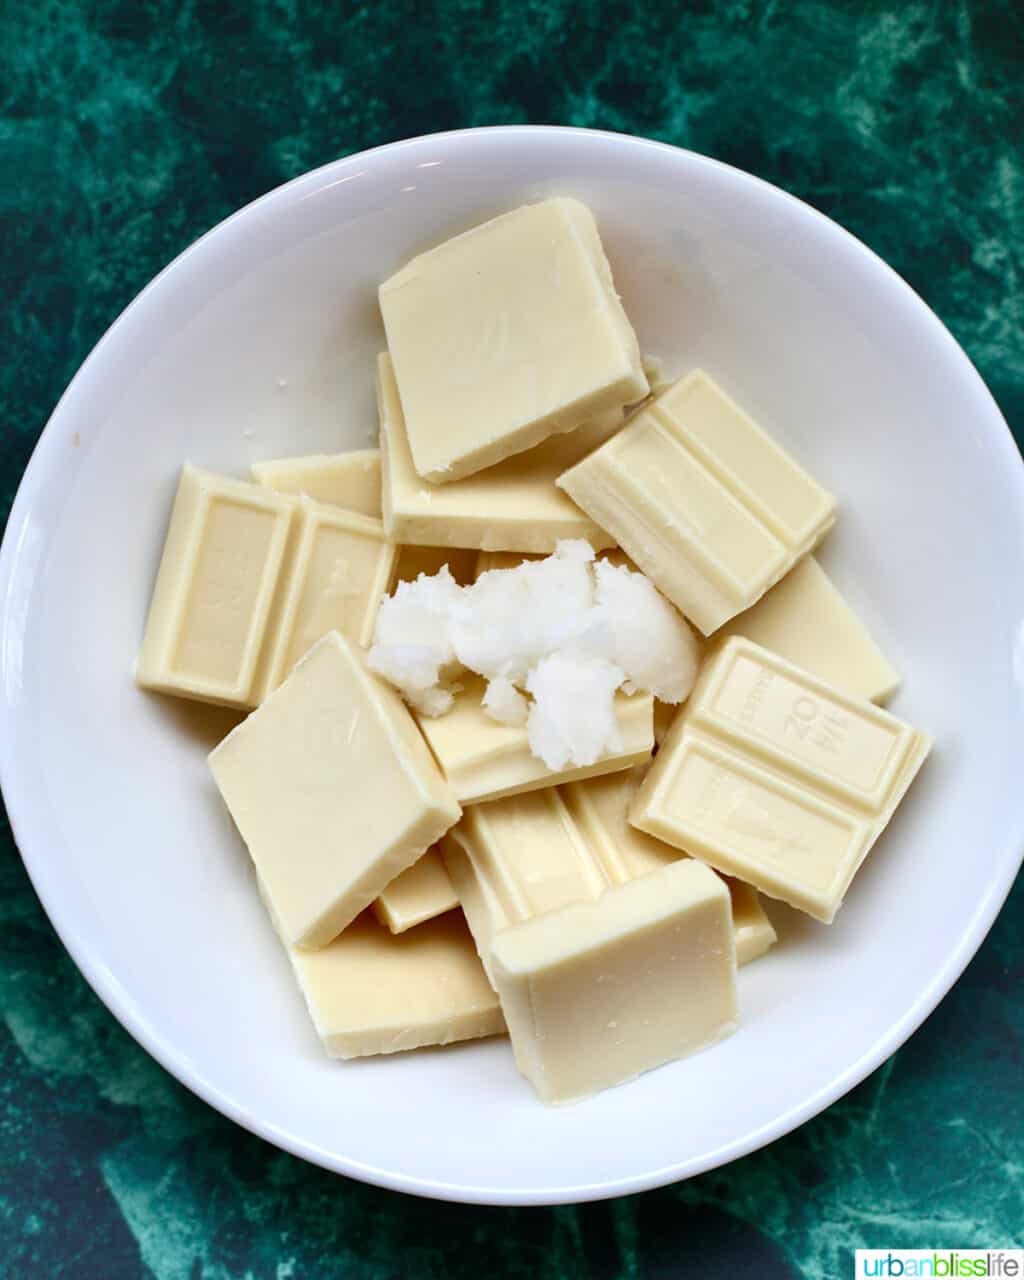 white chocolate and coconut oil in a bowl